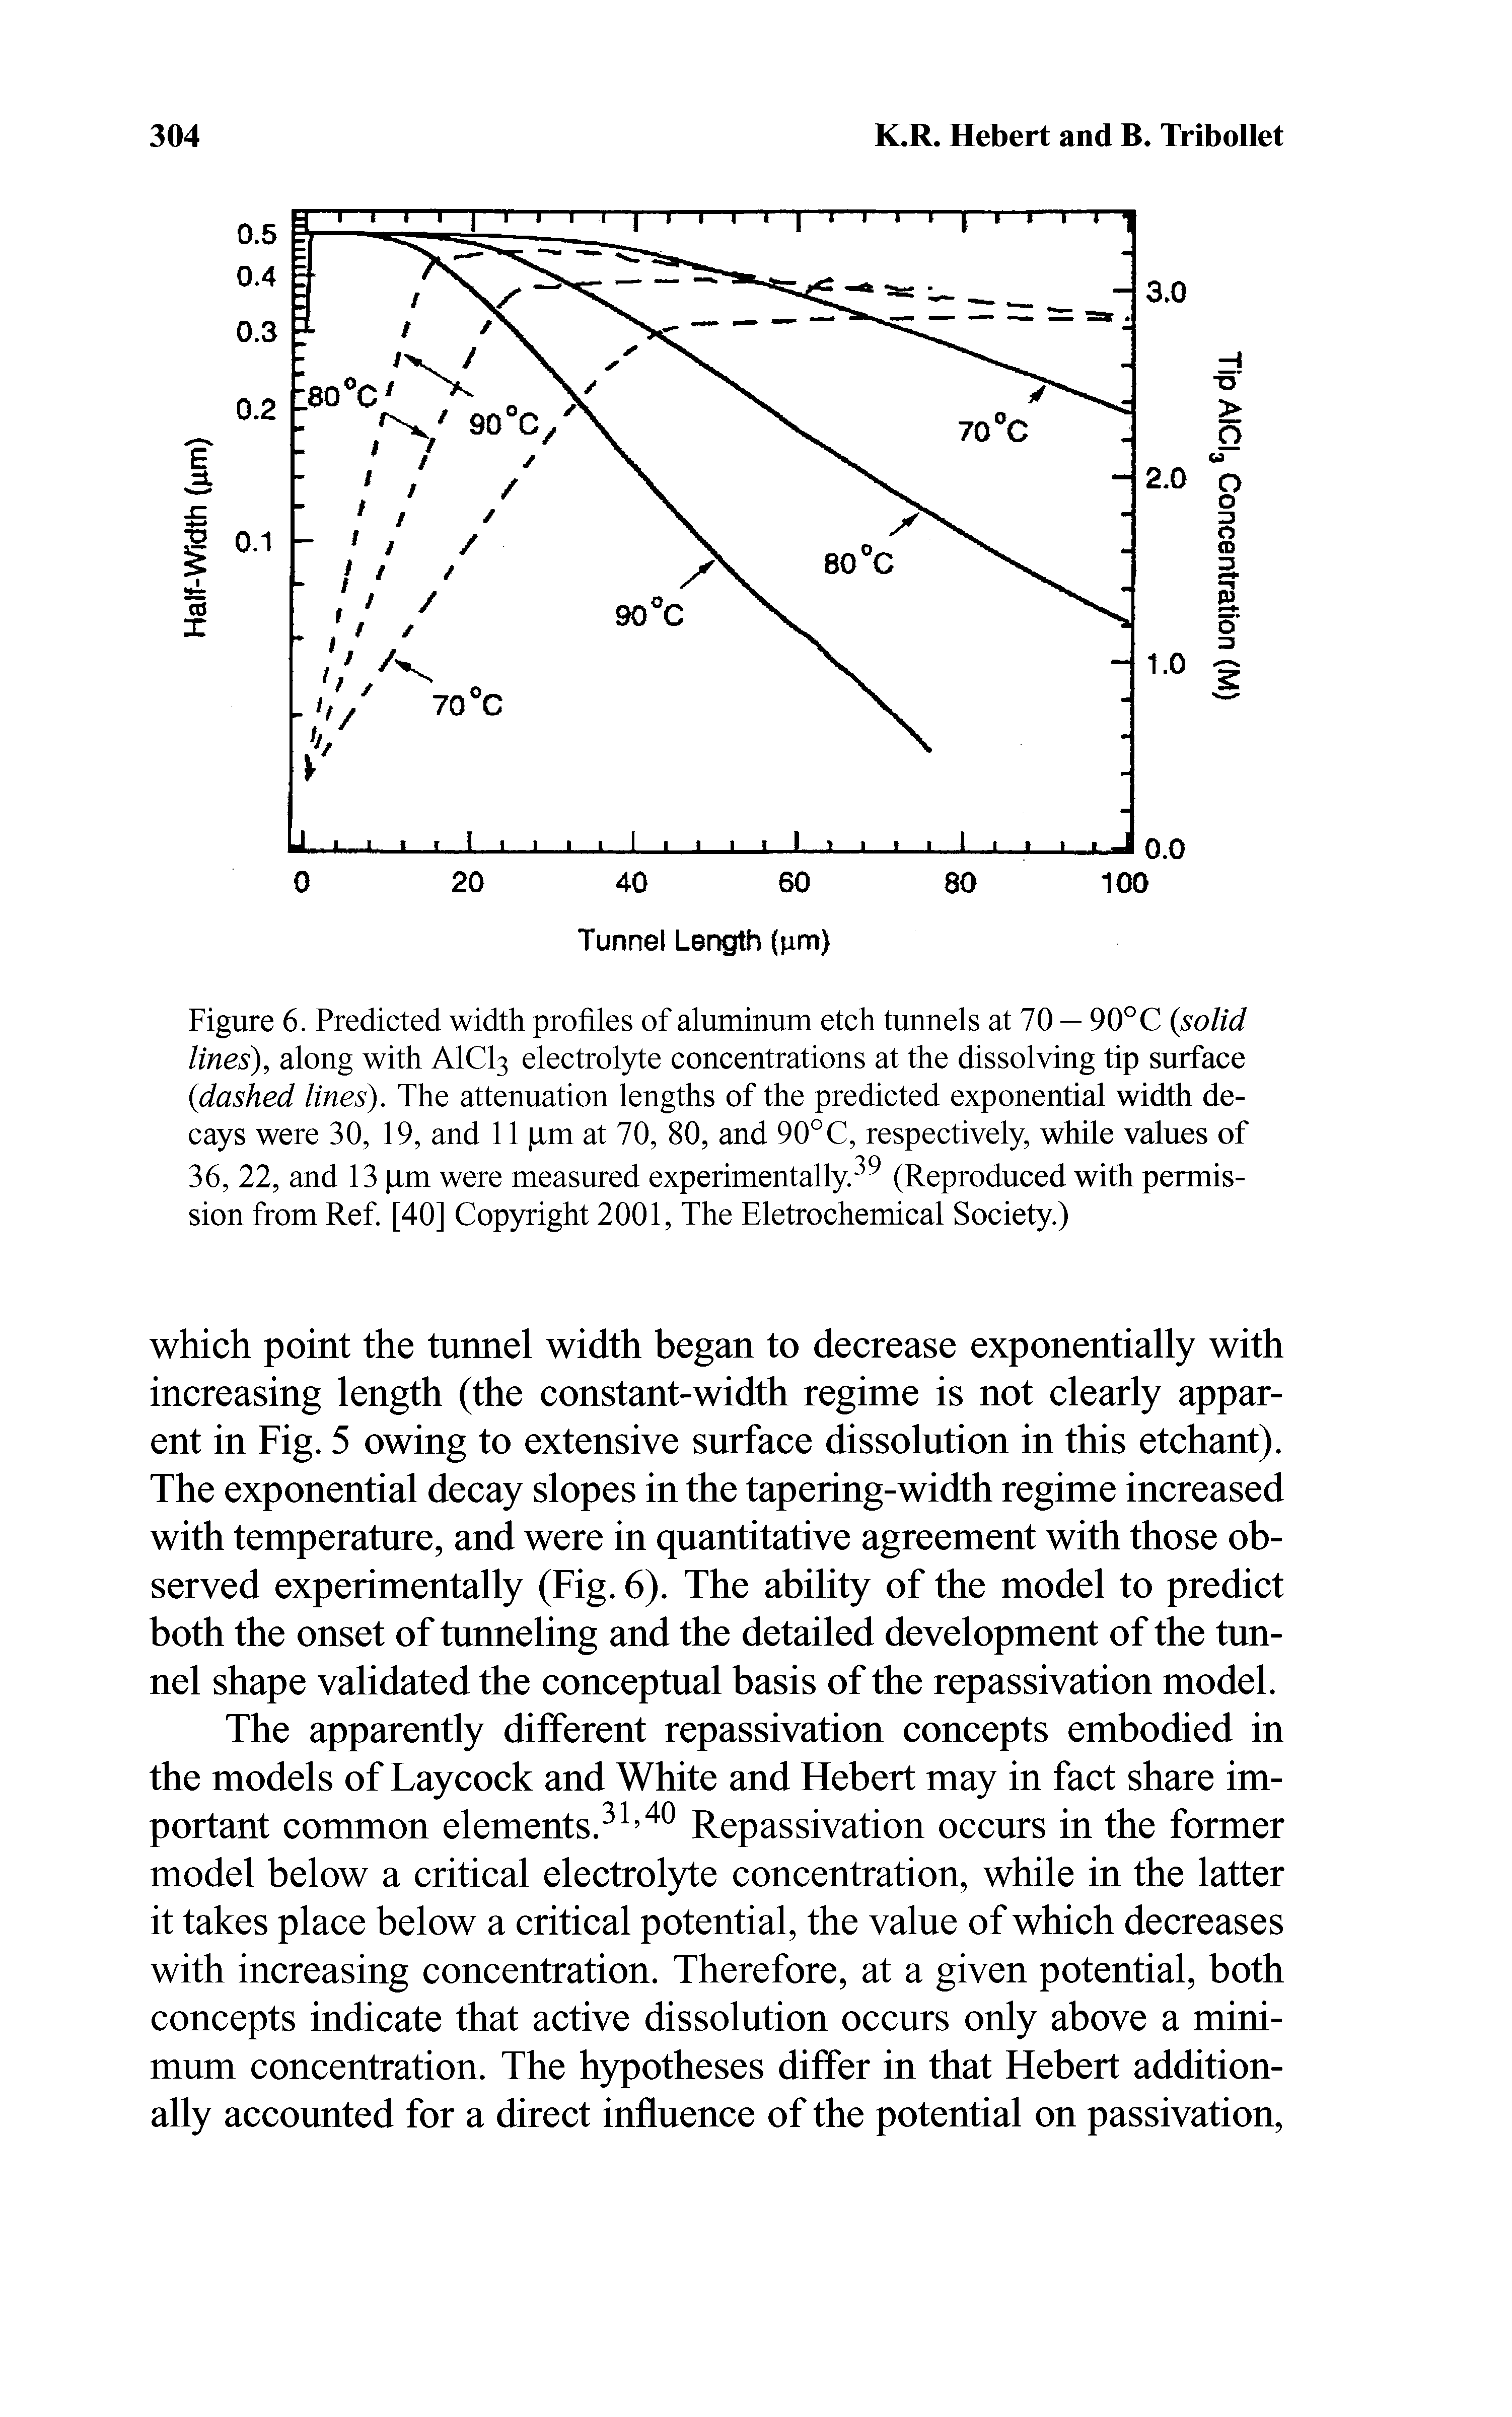 Figure 6. Predicted width profiles of aluminum etch tunnels at 70 — 90° C solid lines), along with AICI3 electrolyte concentrations at the dissolving tip surface dashed lines). The attenuation lengths of the predicted exponential width decays were 30, 19, and 11 im at 70, 80, and 90°C, respectively, while values of...